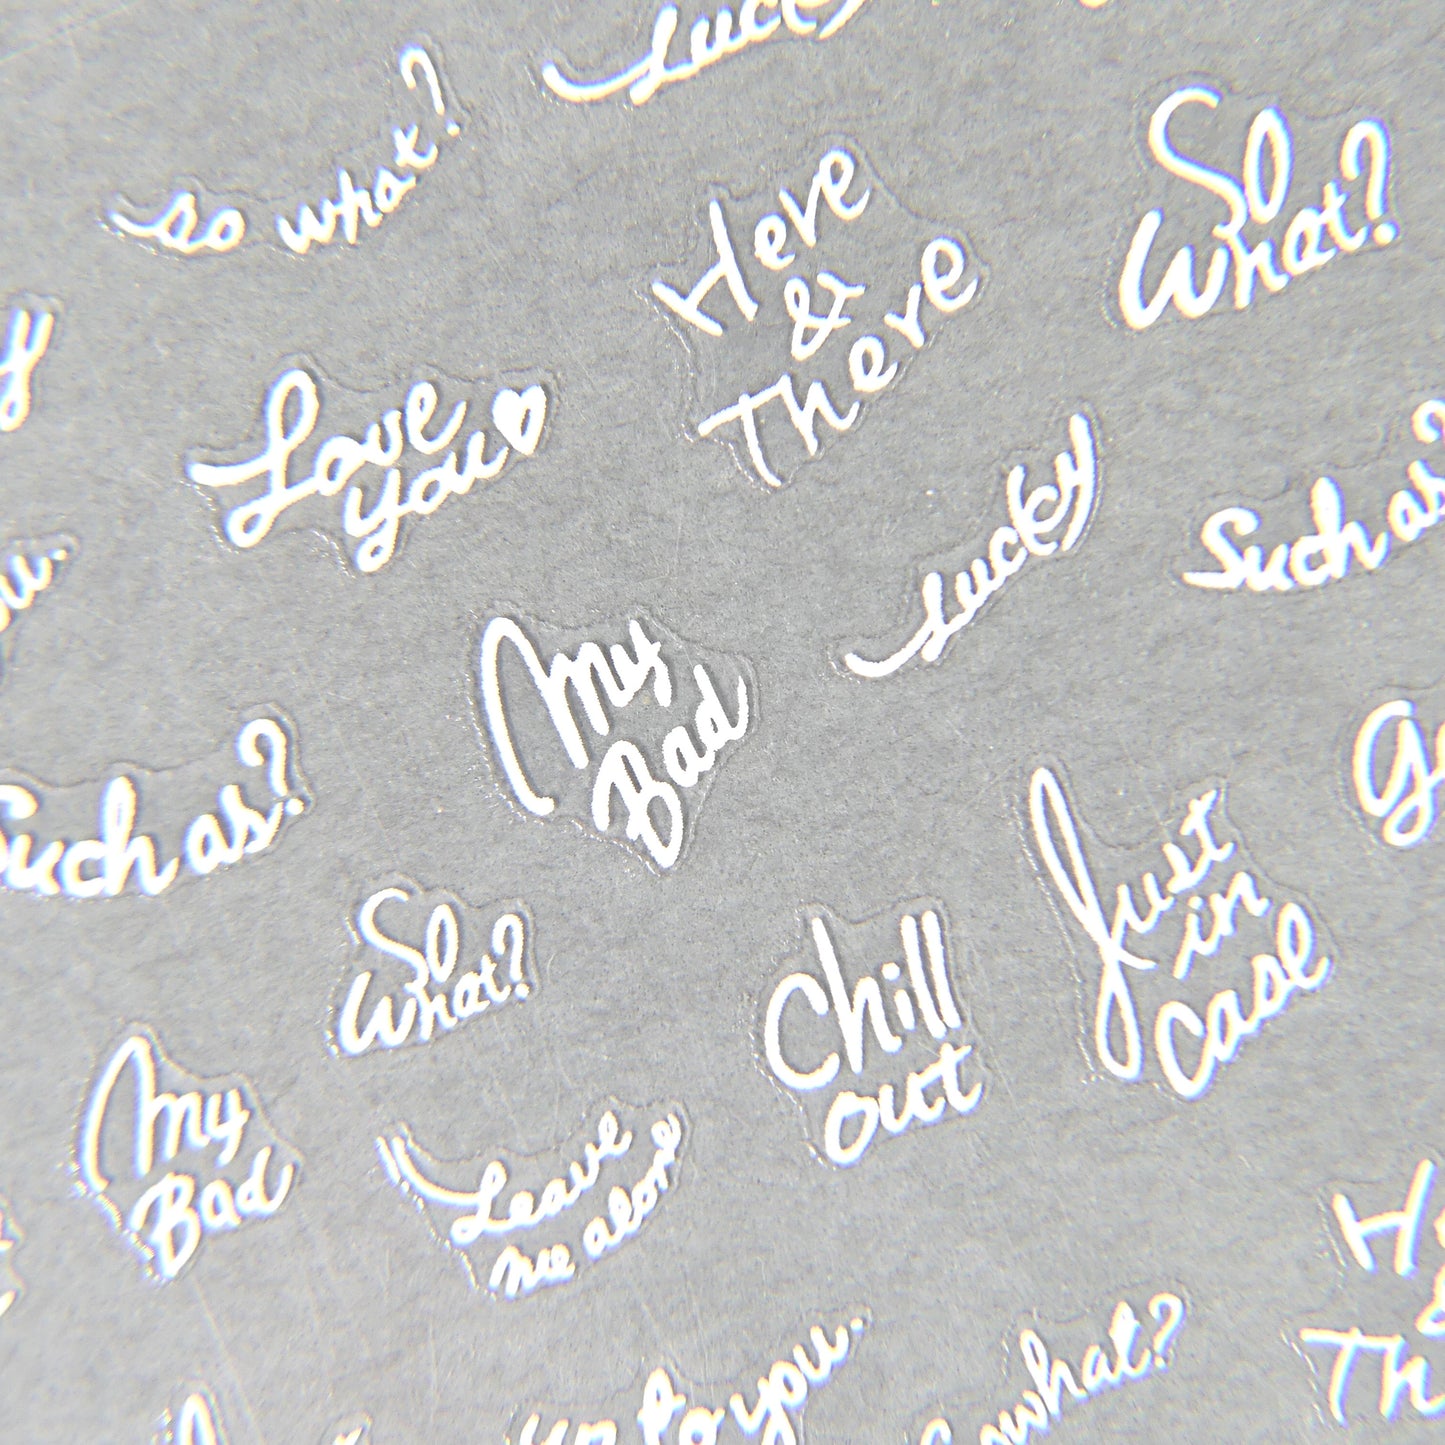 Load image into Gallery viewer, Cursive Words (White) Sticker #13 - My Little Nail Art Shop
